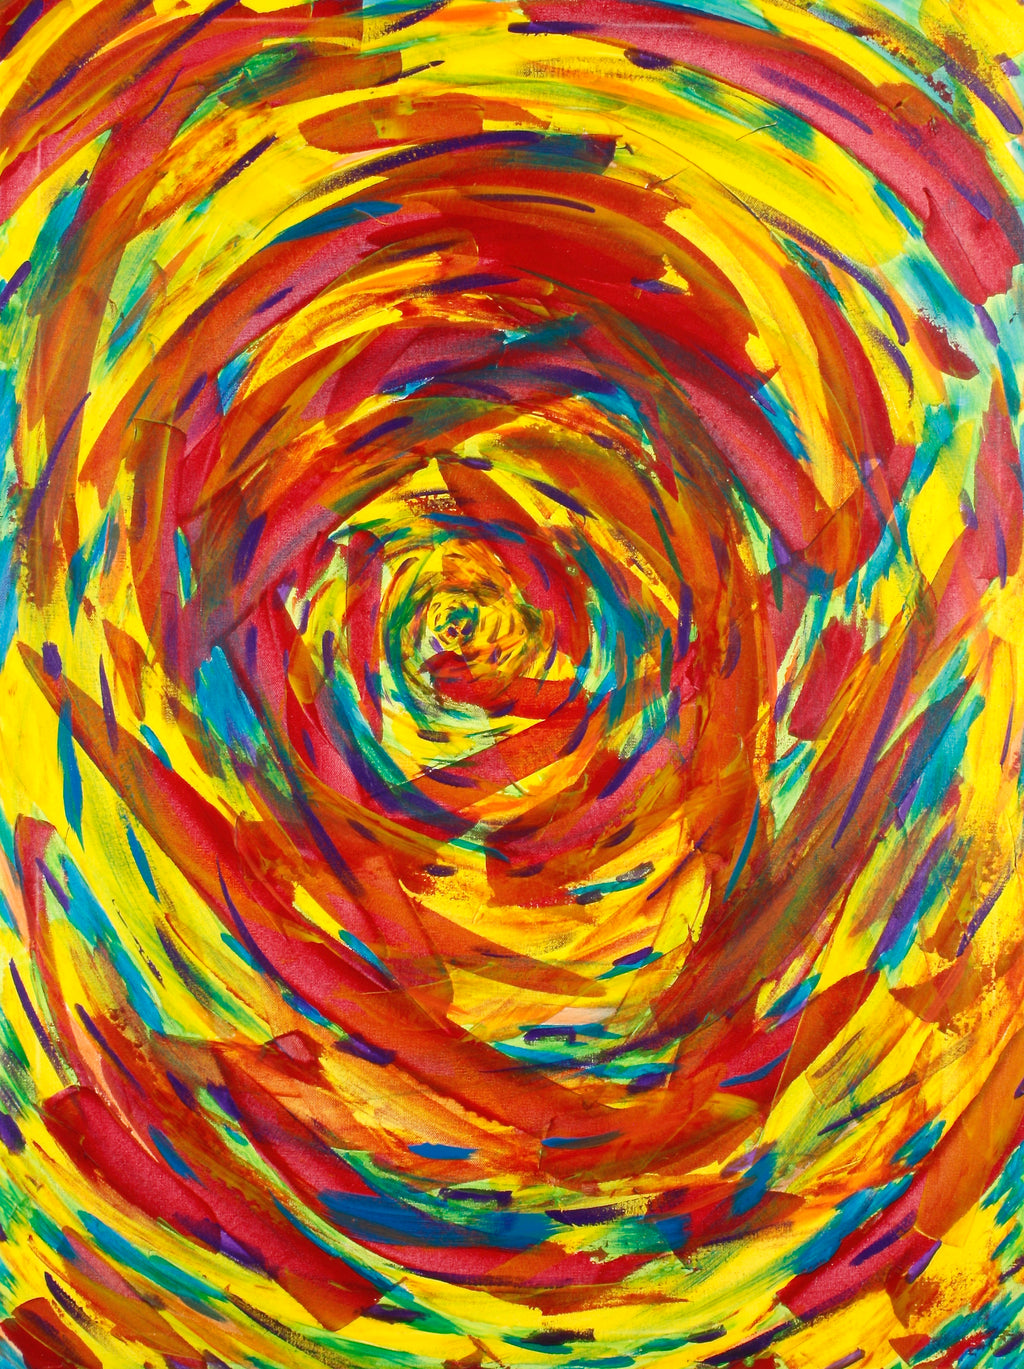 Rainbow Spiral 40in x 30in Original painting